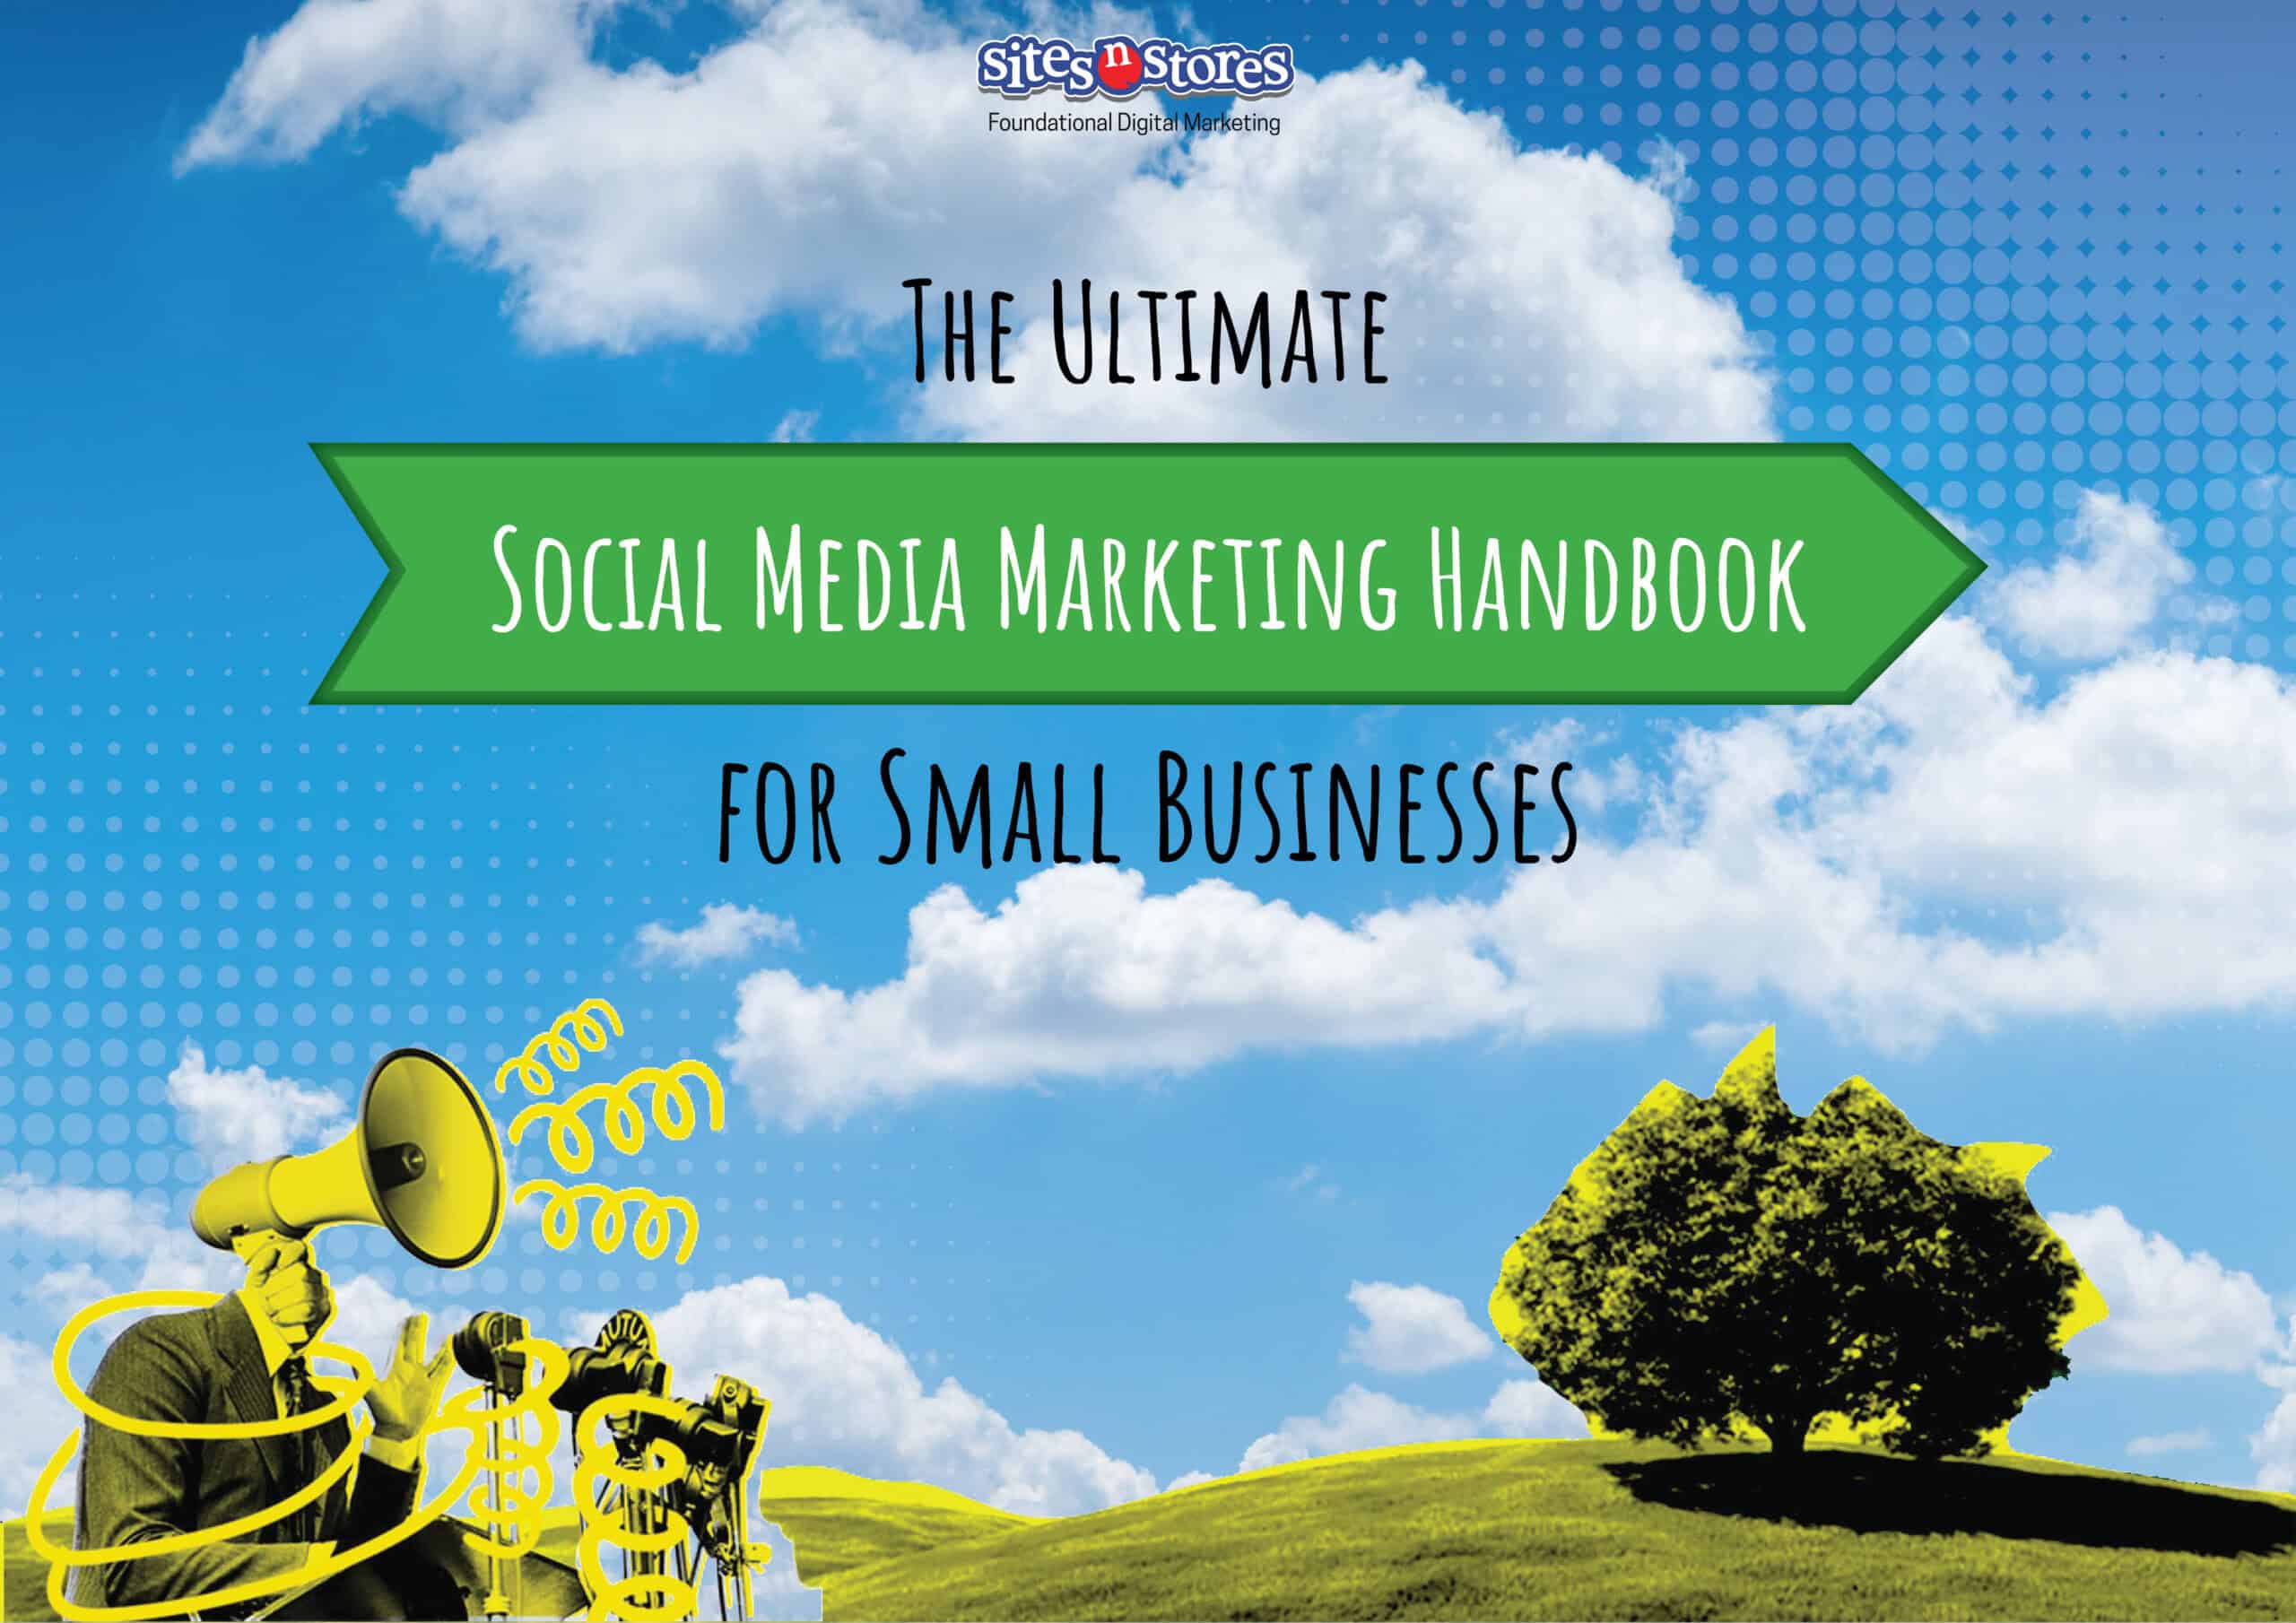 The Ultimate Social Media Marketing Handbook for Small Businesses